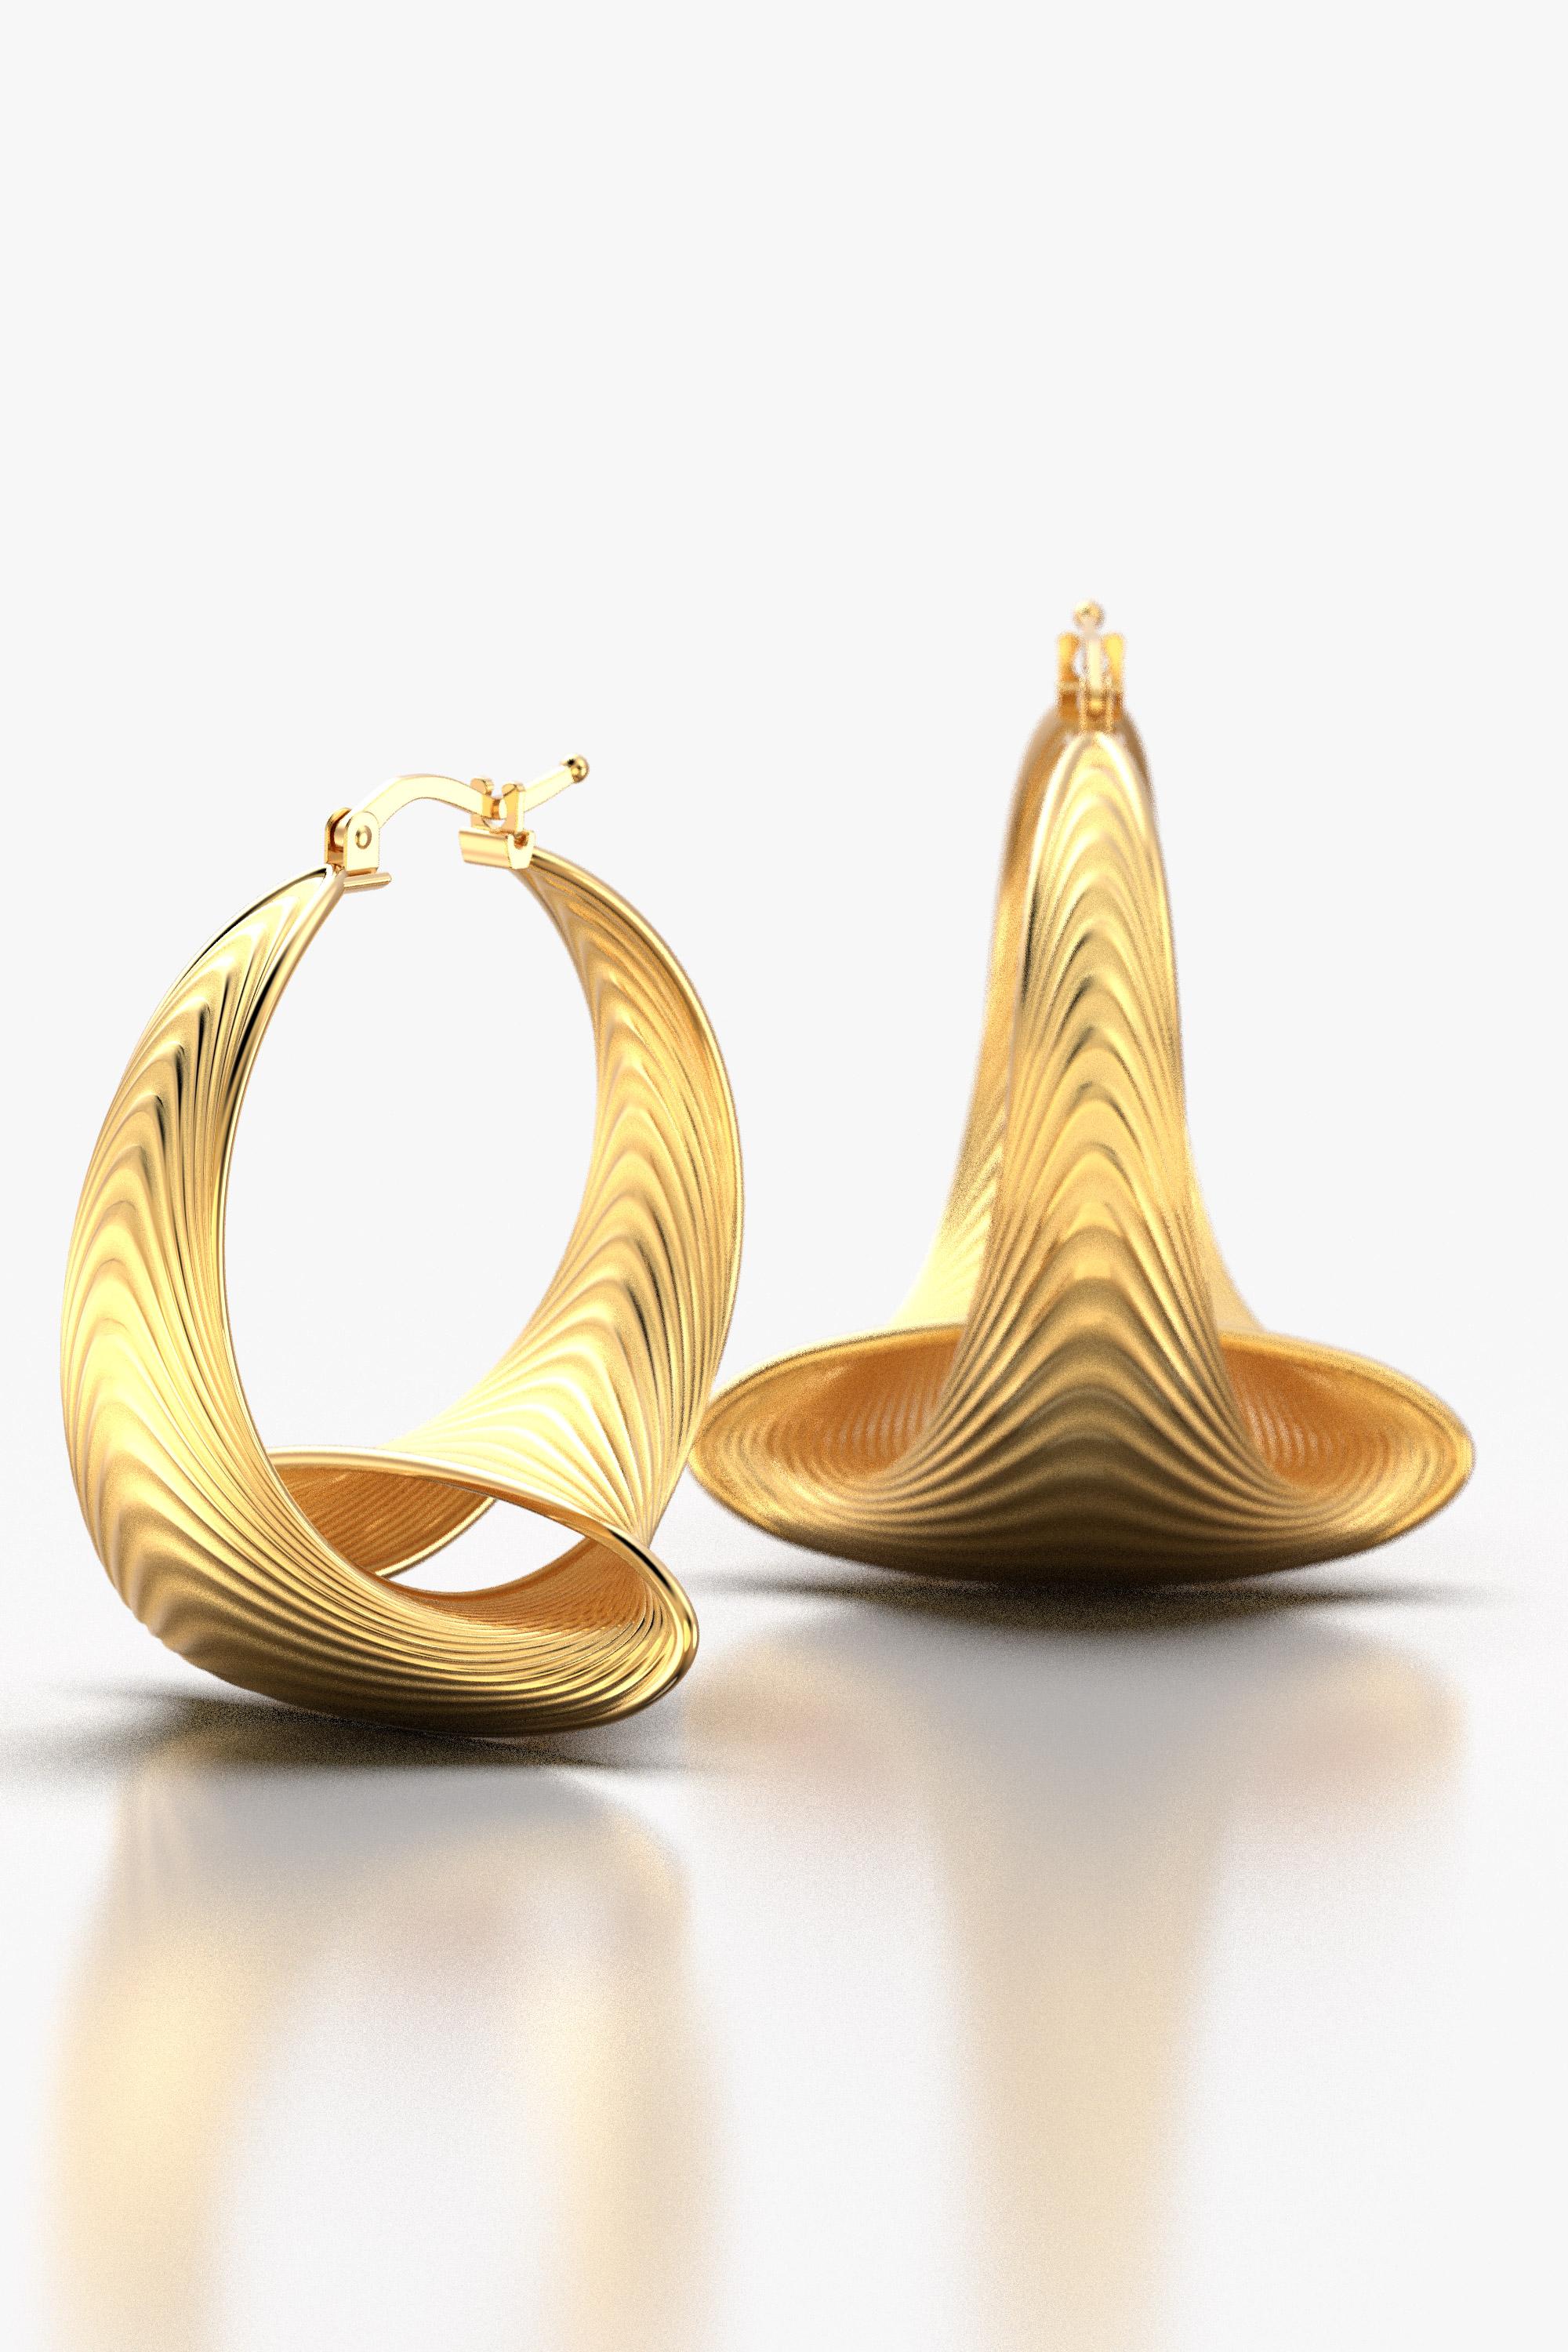  Oltremare Gioielli 14k Gold Hoop Earrings Made in Italy, Italian Fine Jewelry  For Sale 1